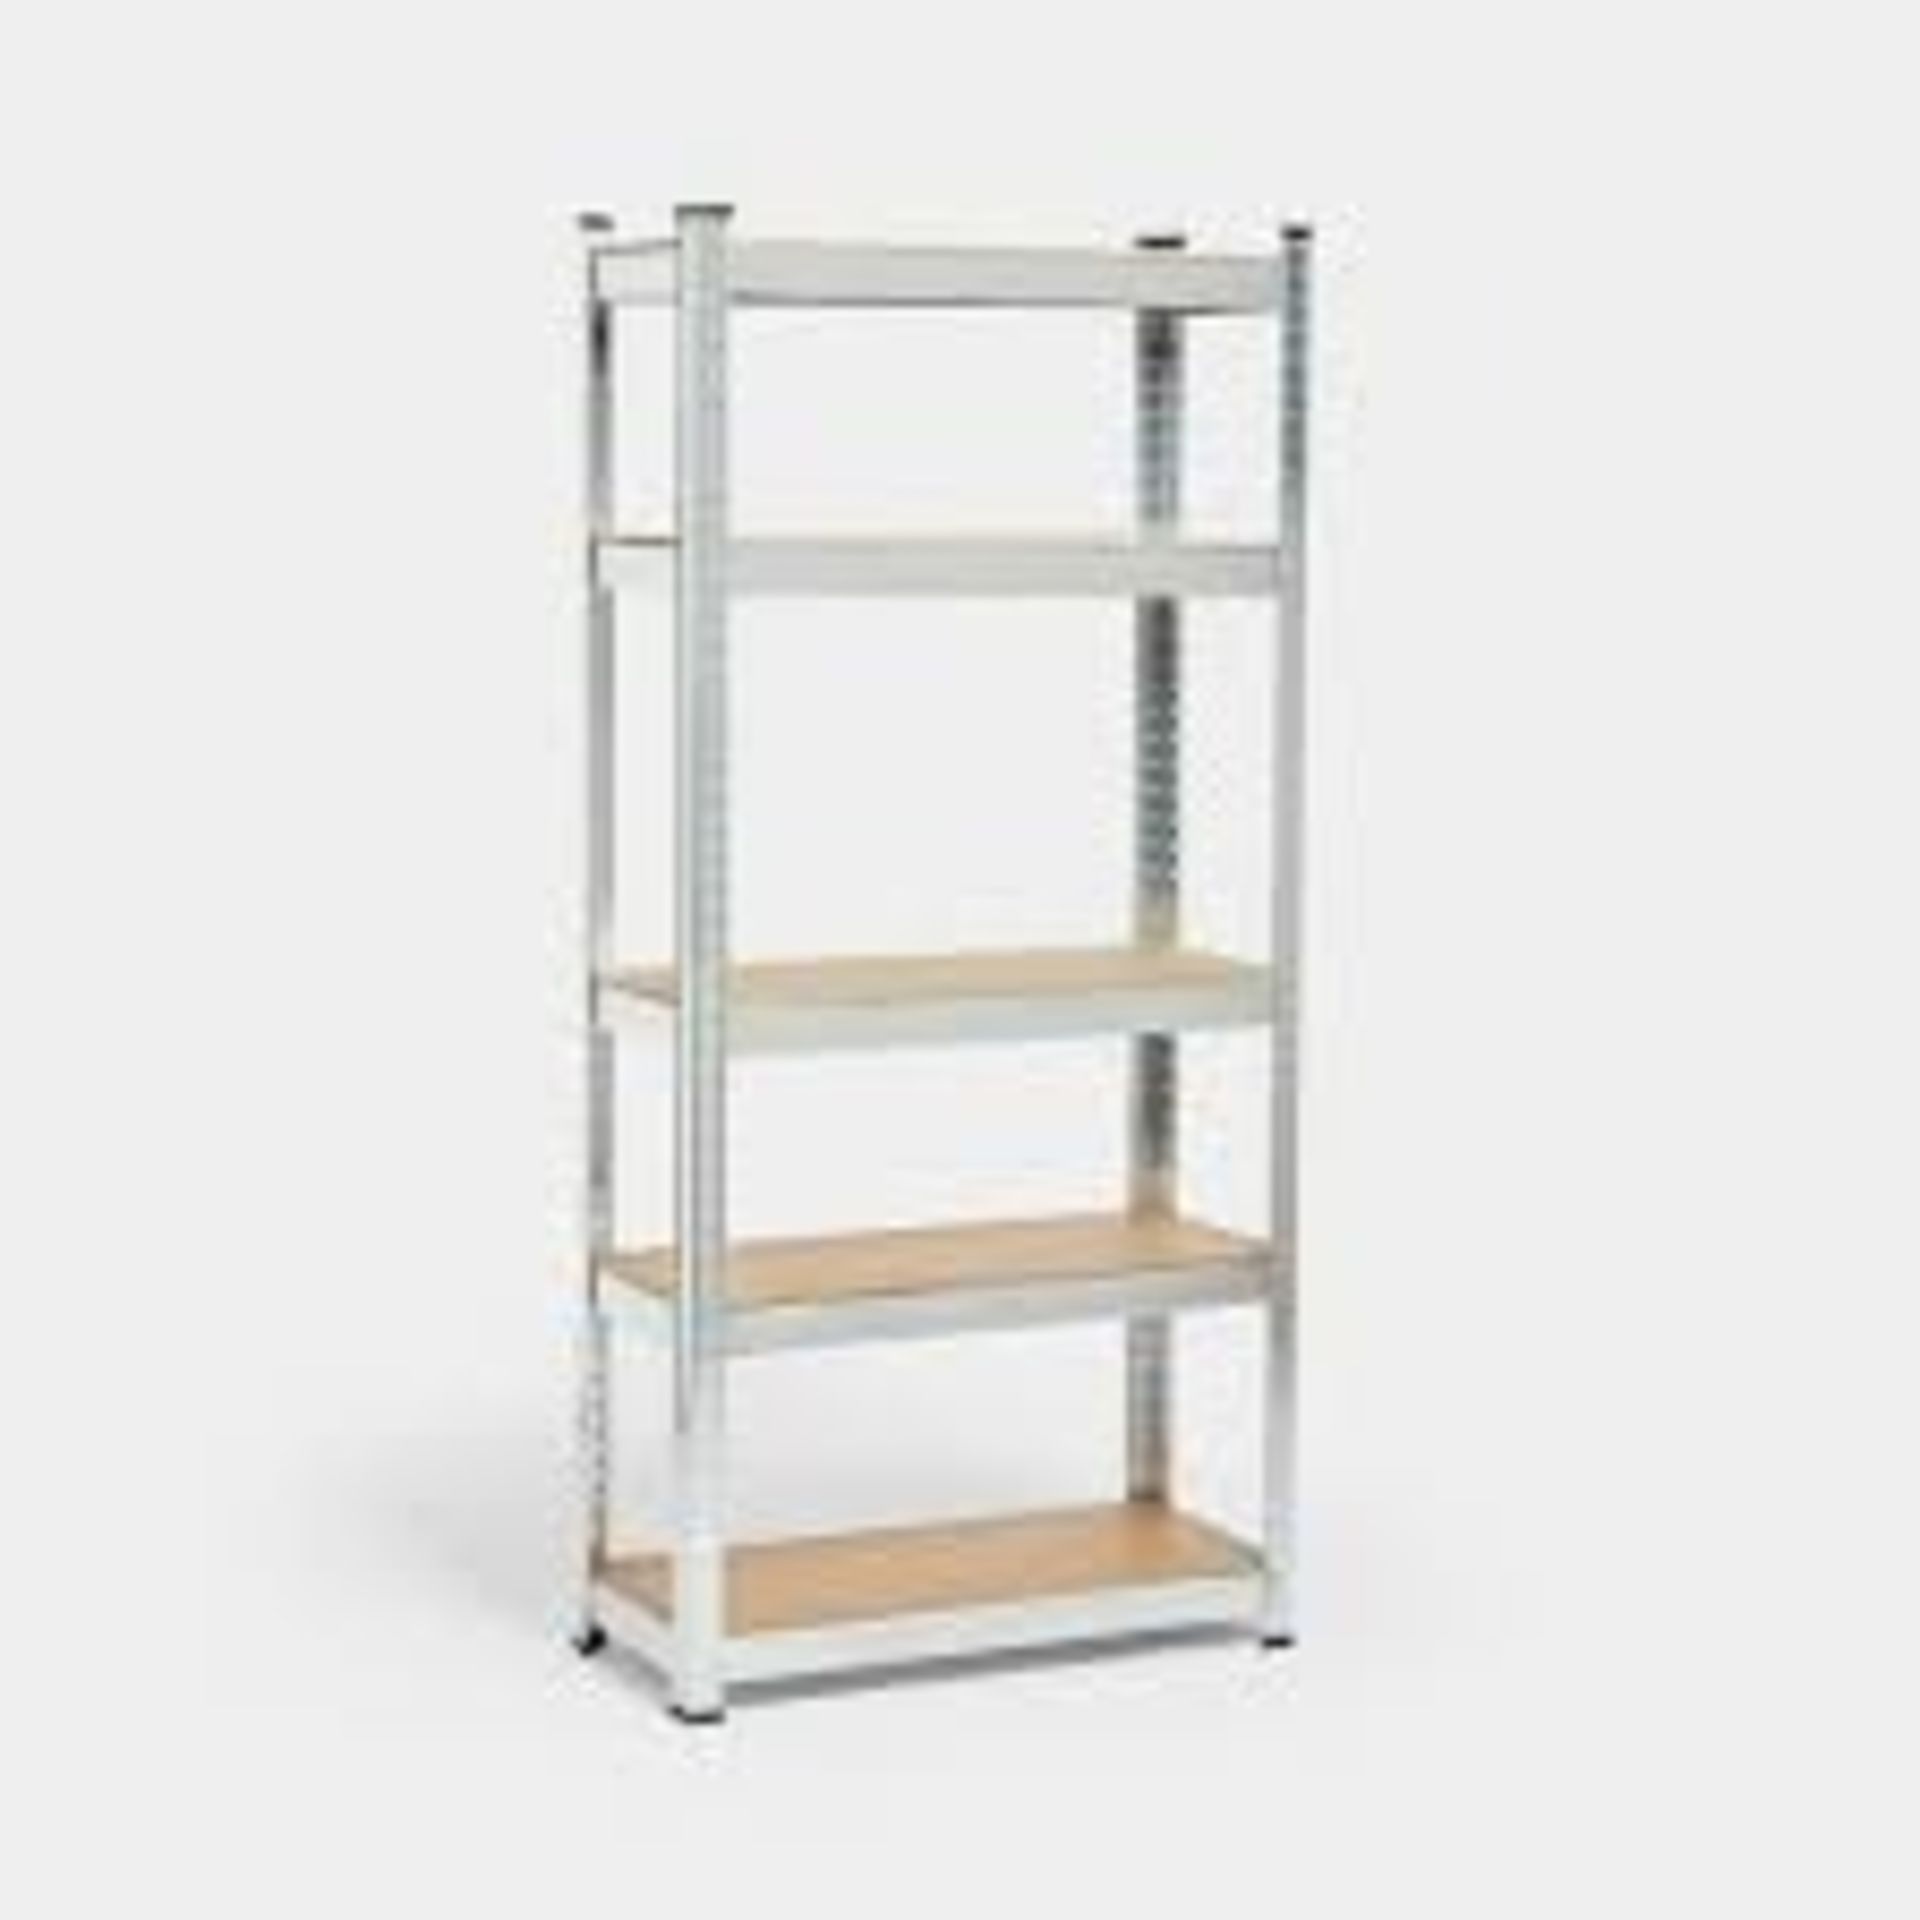 Garage Shelving Units, Heavy Duty Shelving Unit for Home, Office & Garage Storage, 5-Tier